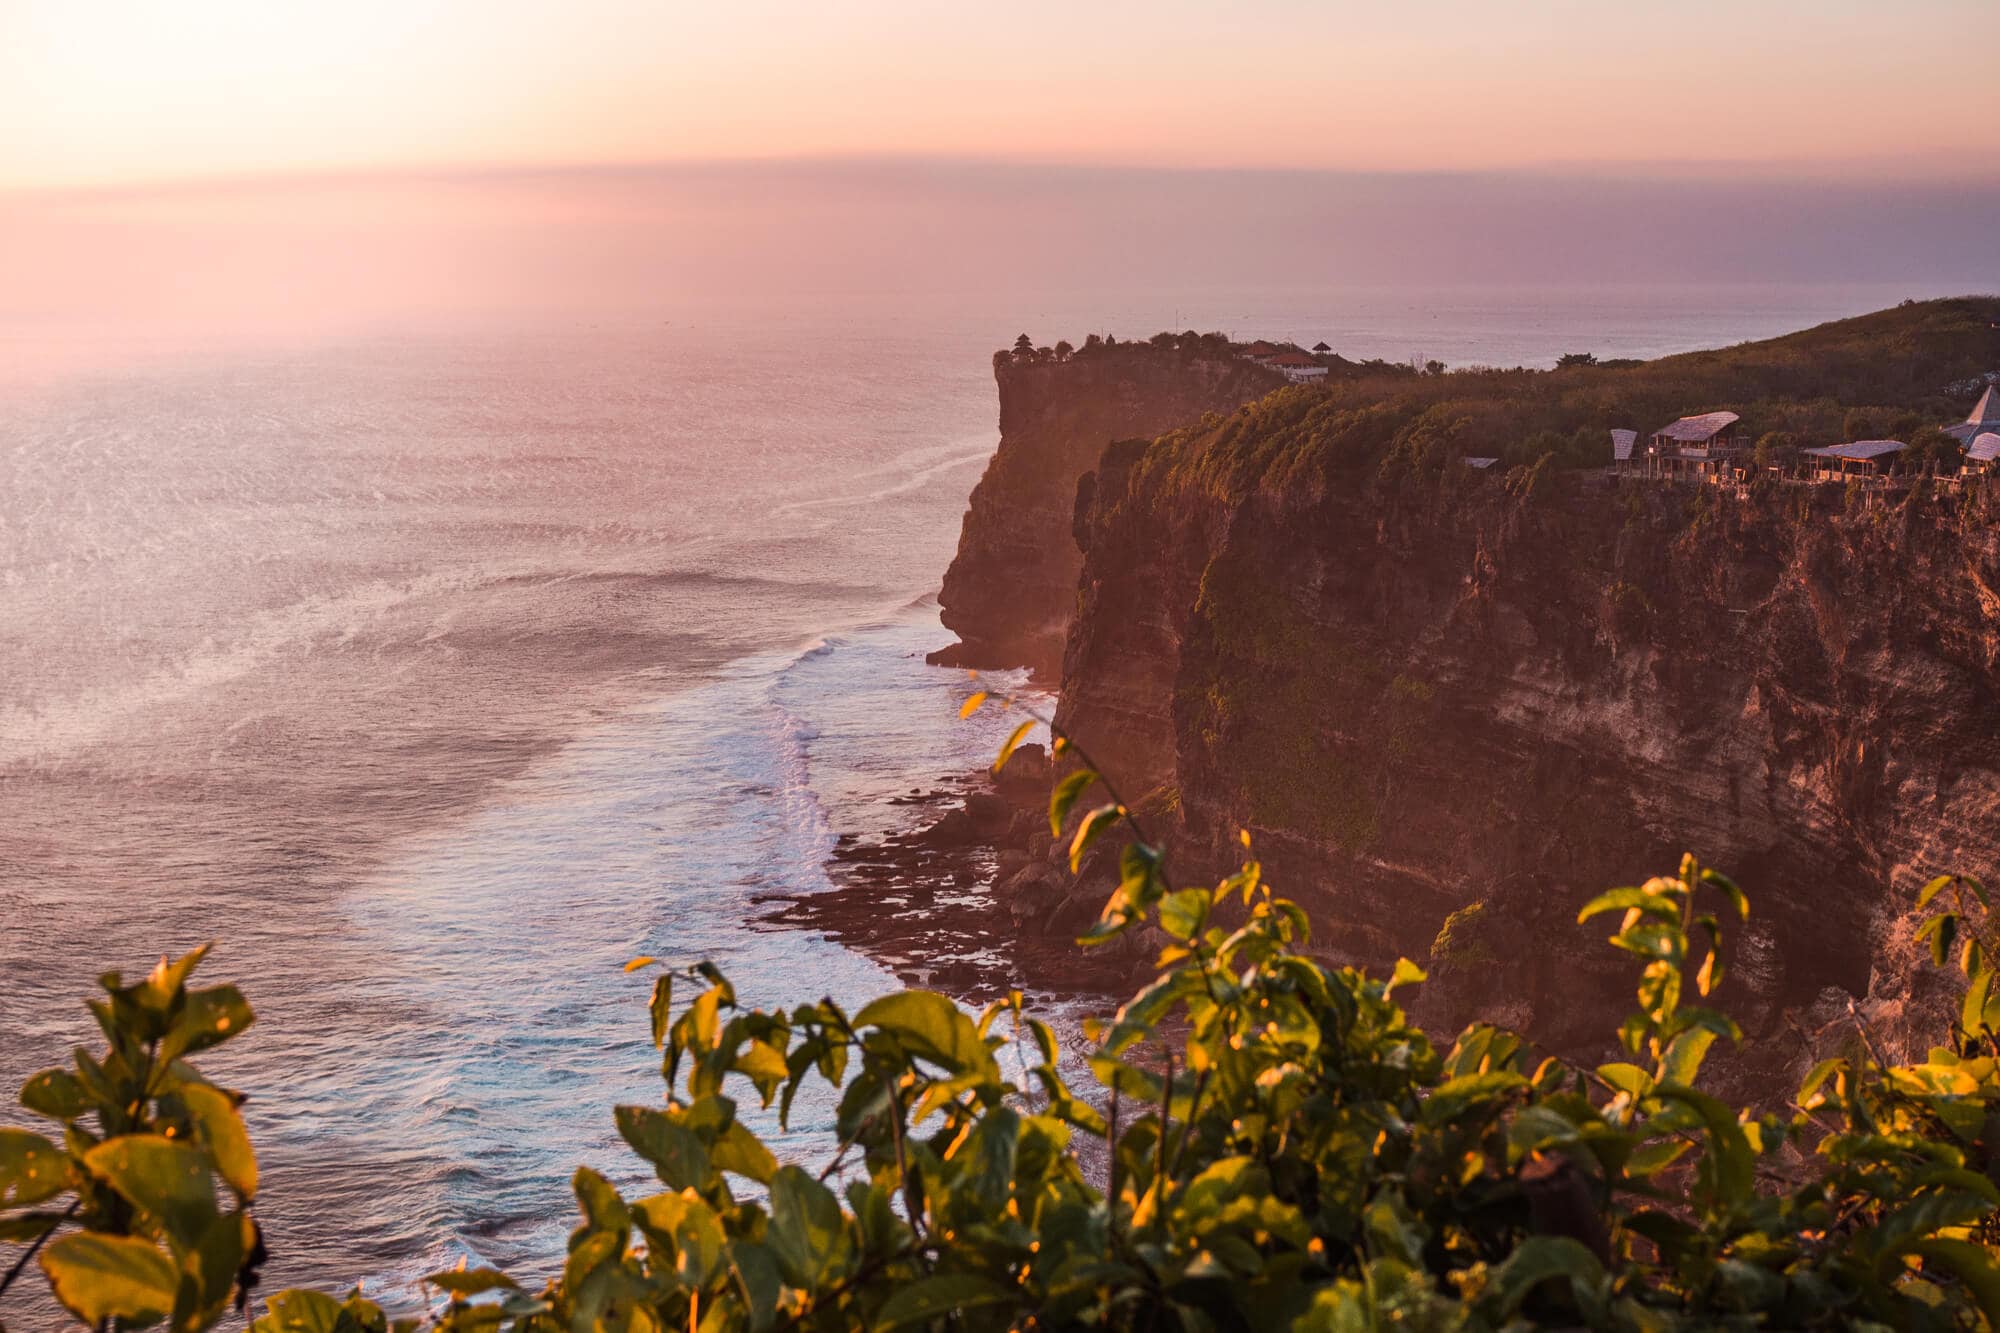 Karang Boma Cliff, a New Sunset Spot on the Cliffs of South Bali